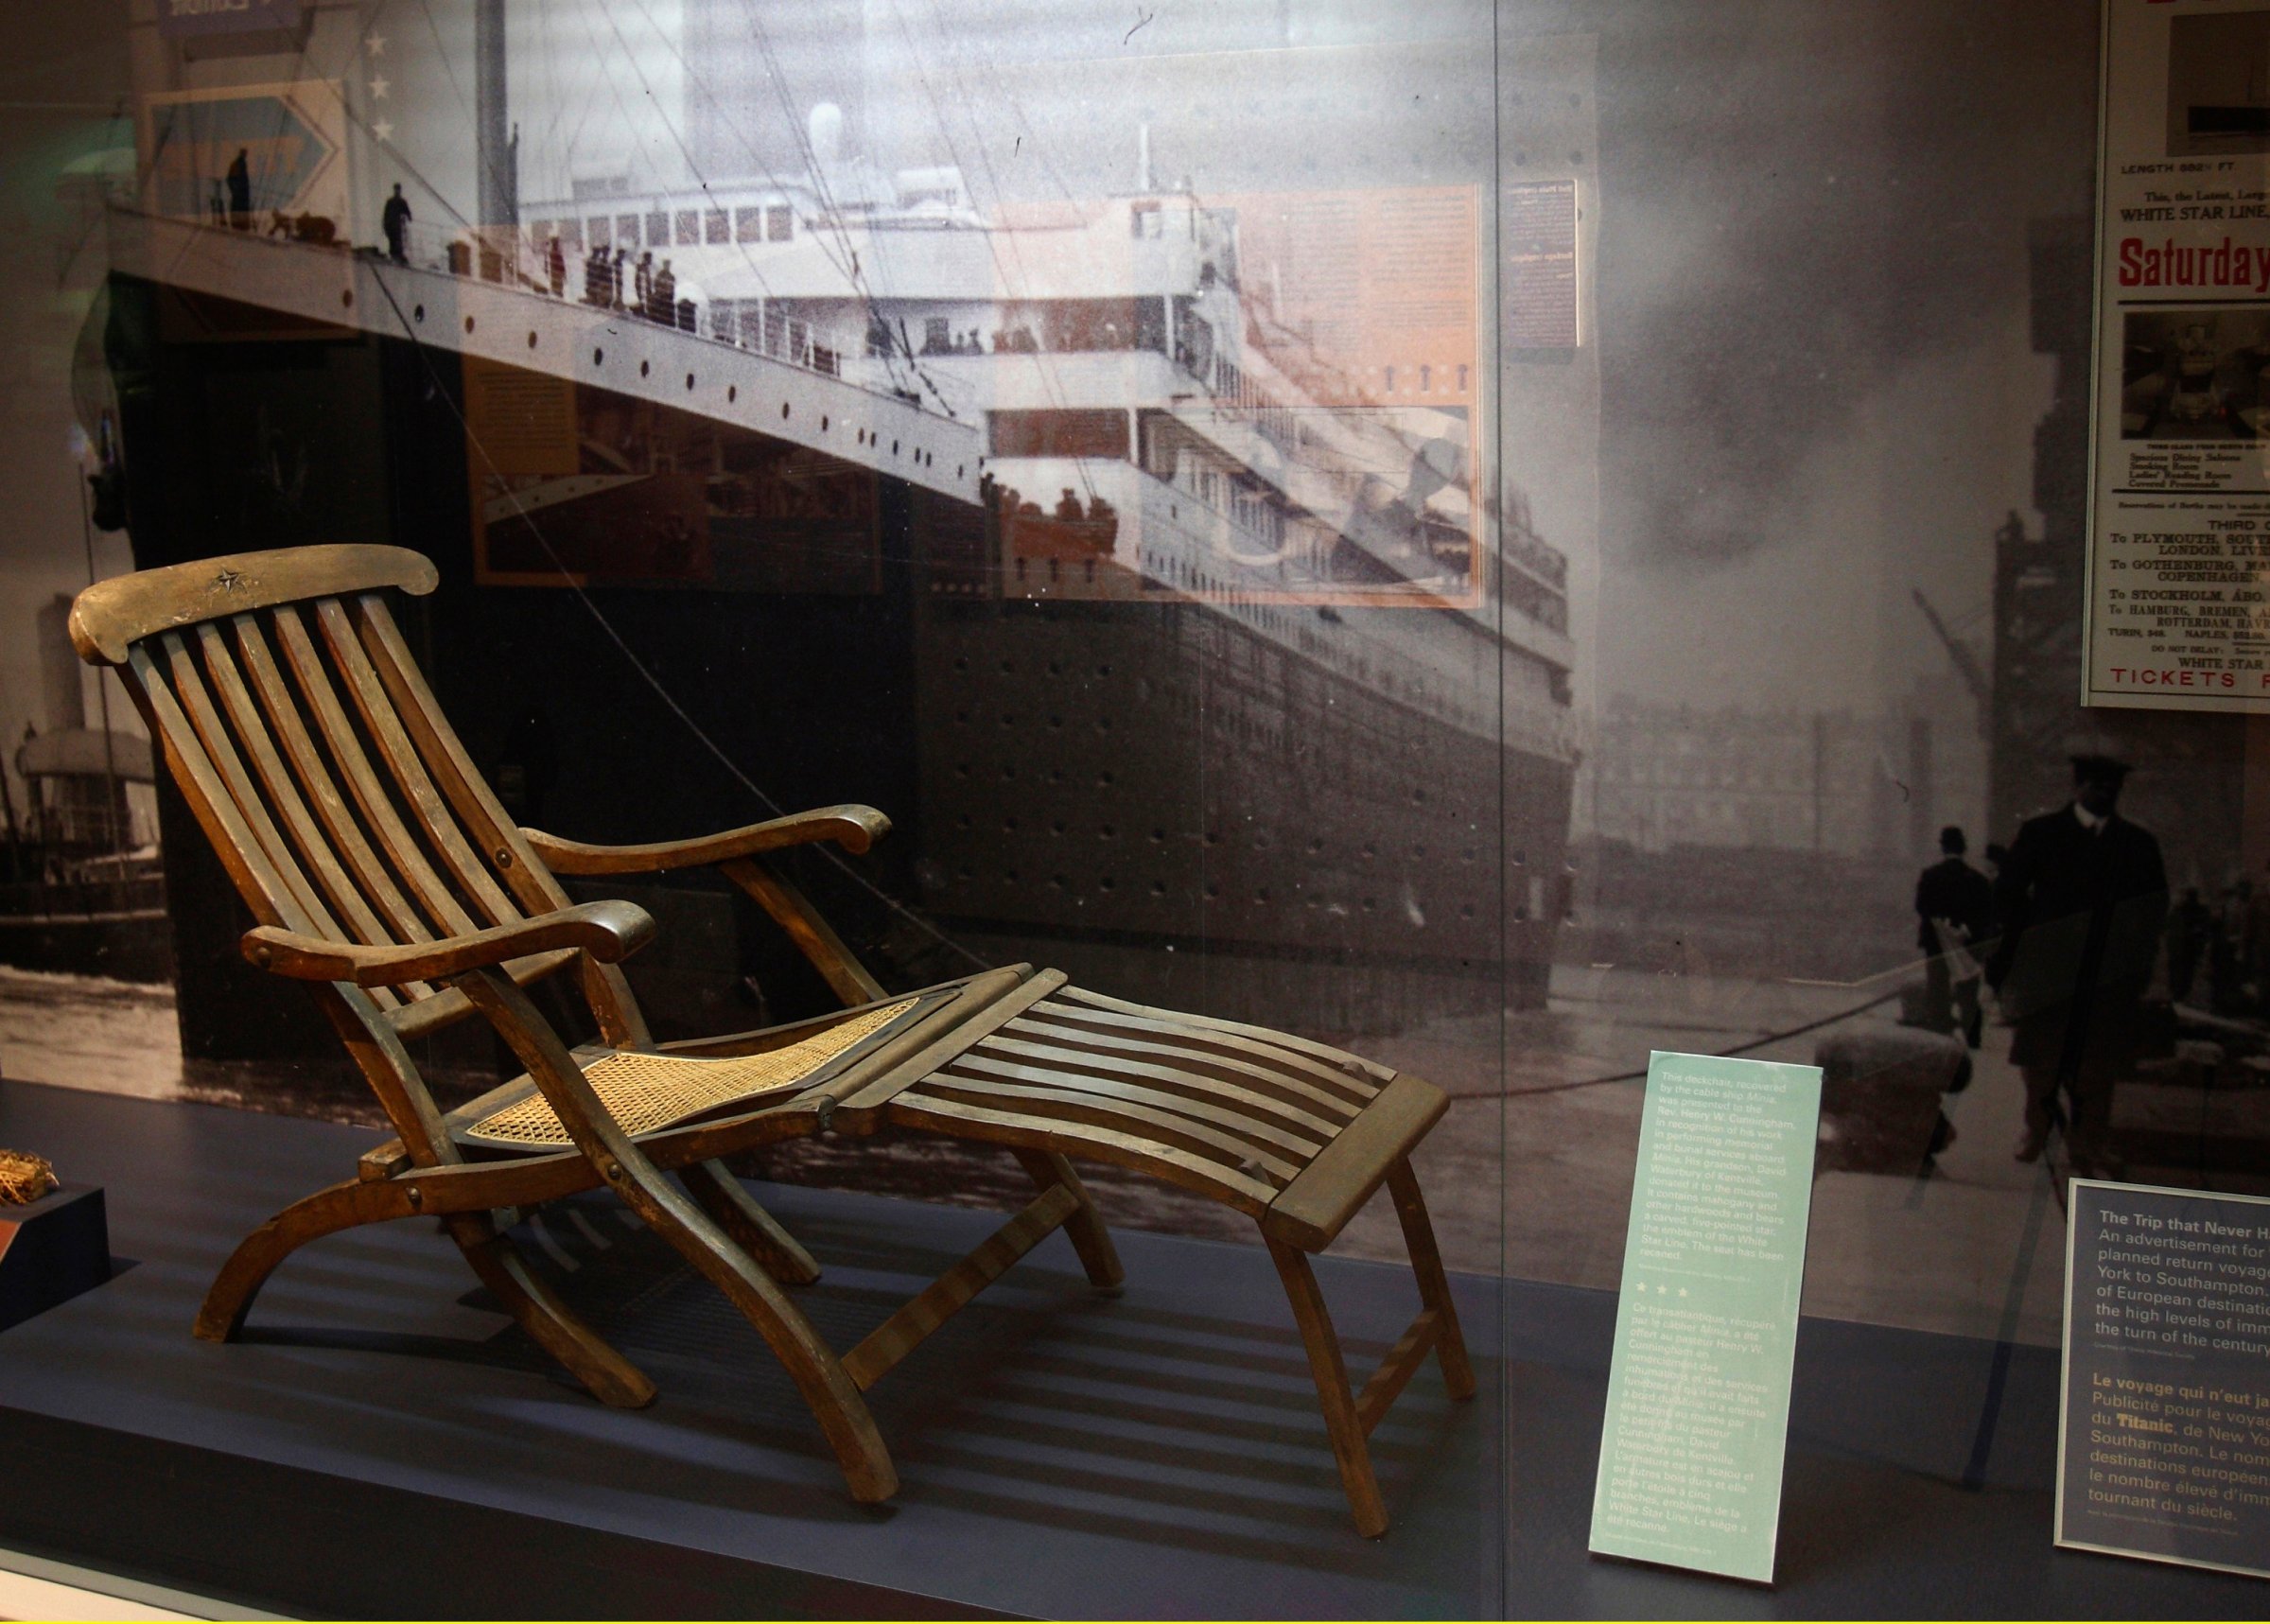 MAHOGANY DECK CHAIR RECOVERED FROM TITANIC IS SEEN IN THE MARITIME MUSEUM OF THE ATLANTIC IN HALIFAX